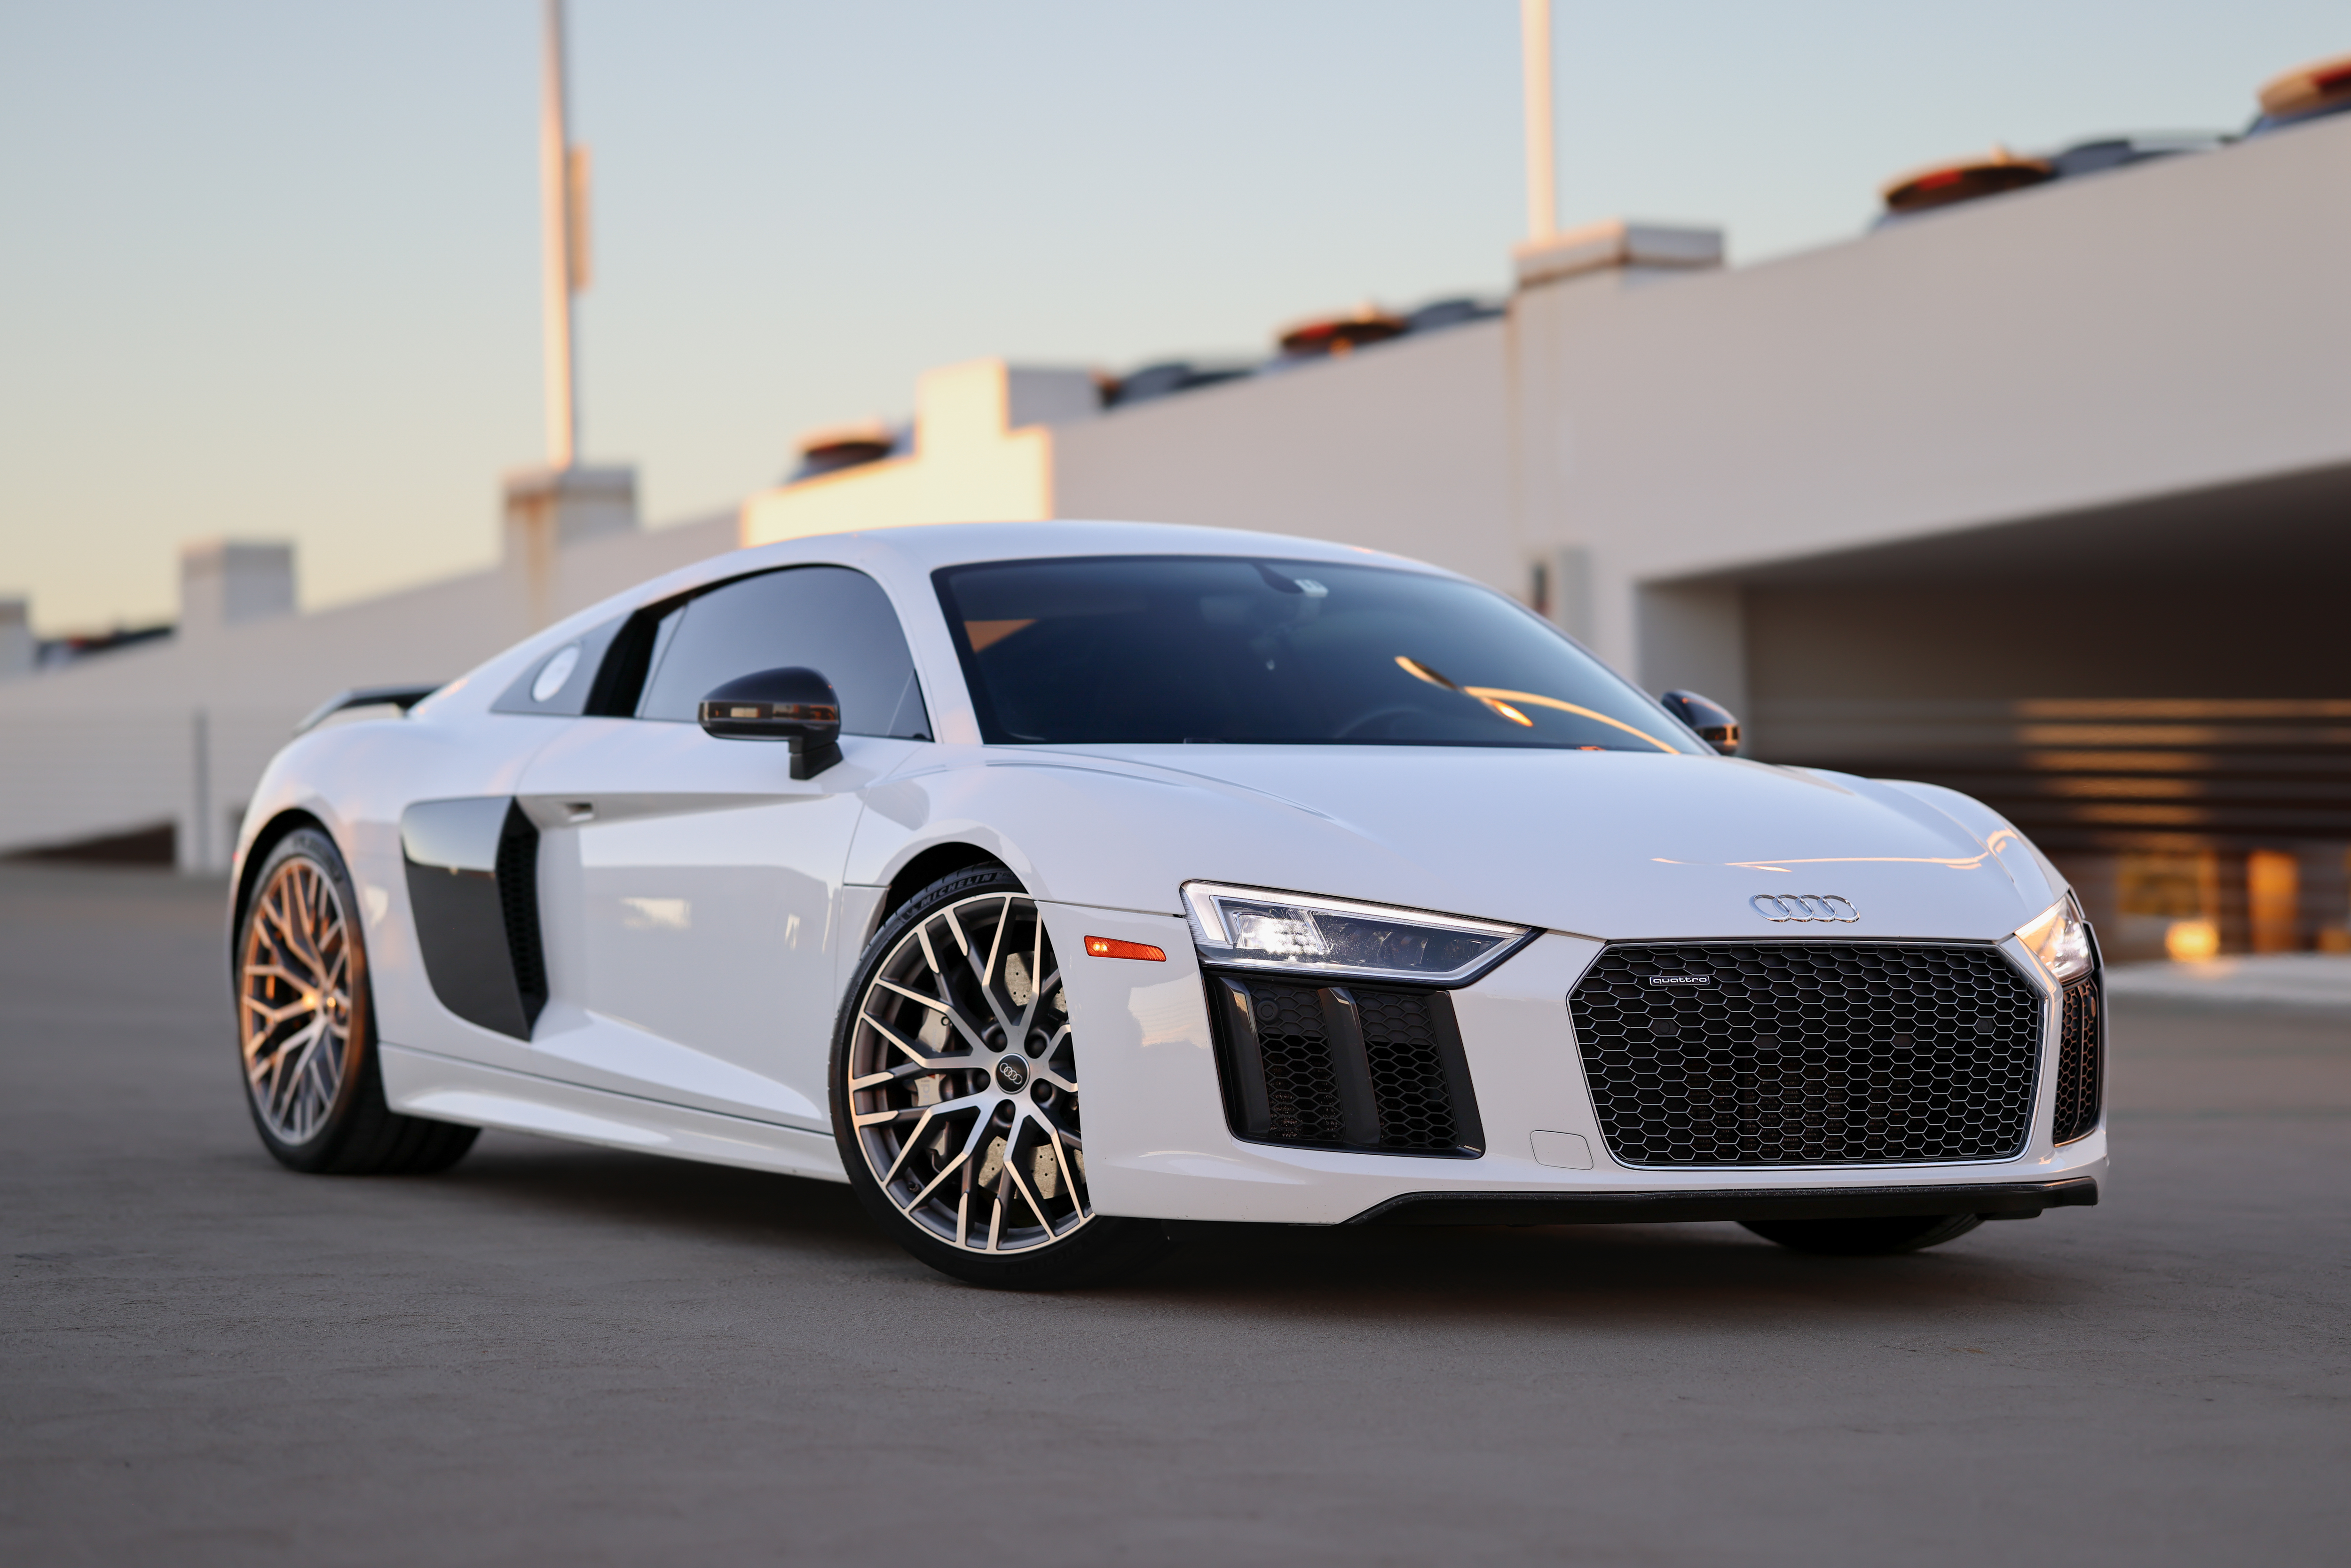 Used 2017 Audi R8 for Sale Right Now - Autotrader